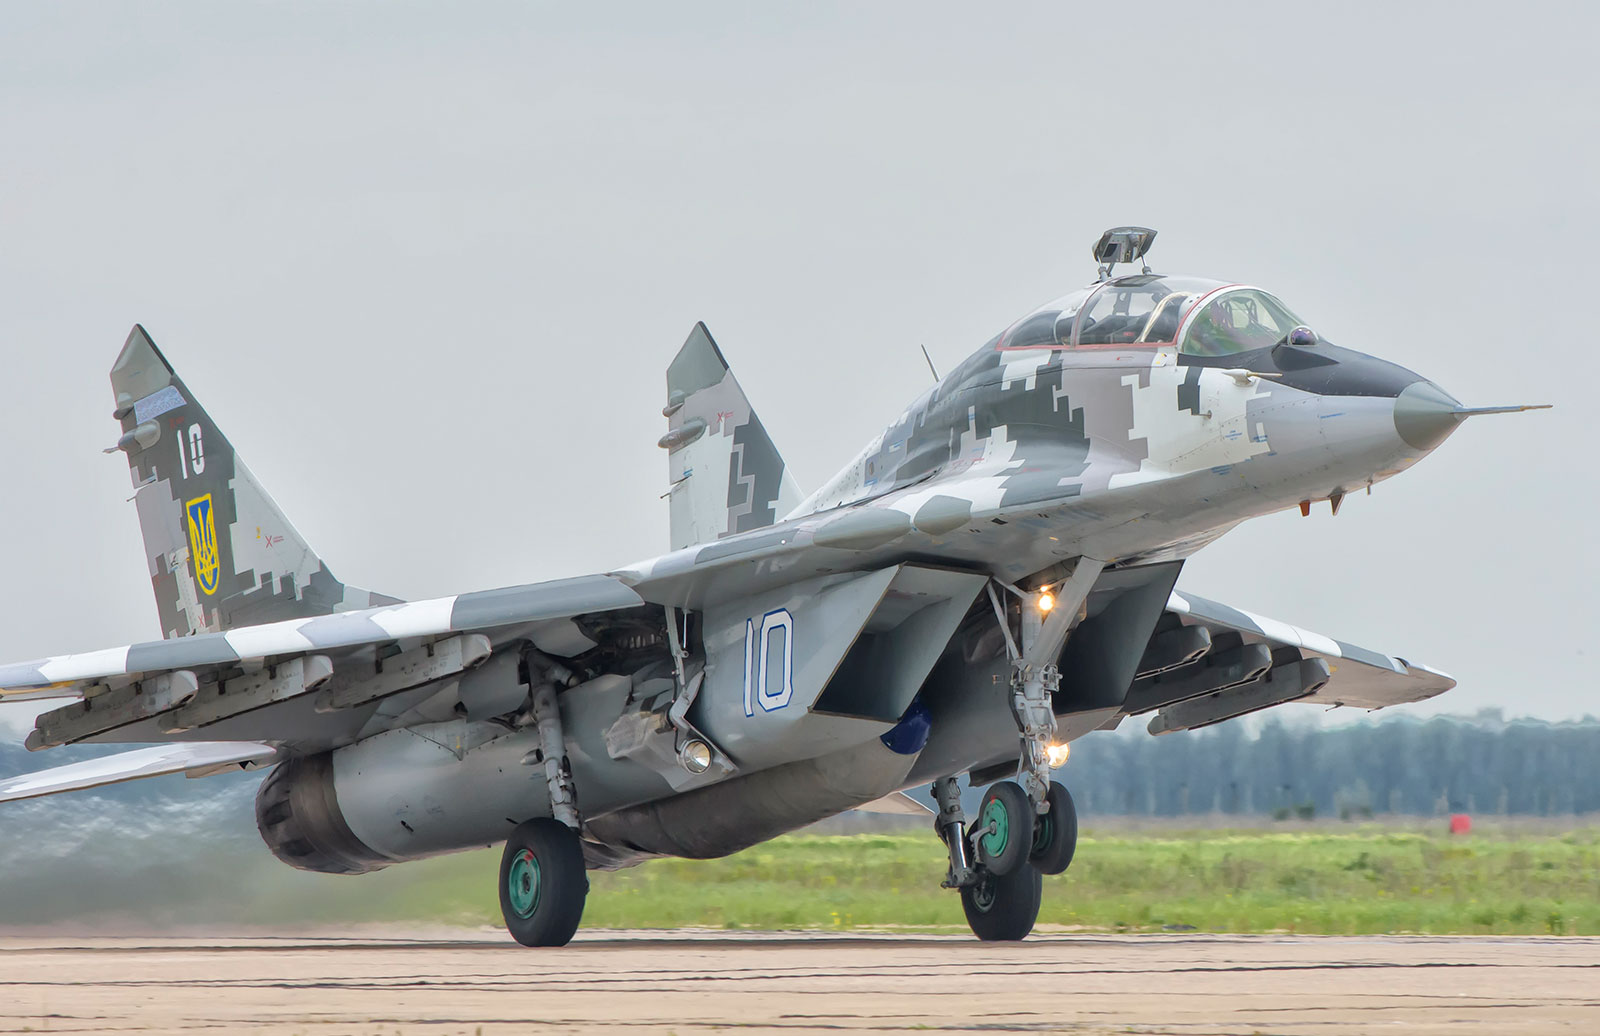 A Ukrainian Air Force Mig-29 takes off from Mykolaiv Air Base for a training mission in Ukraine in 2016. Ukrainian President Volodymyr Zelensky has repeatedly asked other countries for Soviet-era Mig-29 Fulcrum fighter jets, which Ukrainian pilots already know how to fly . 